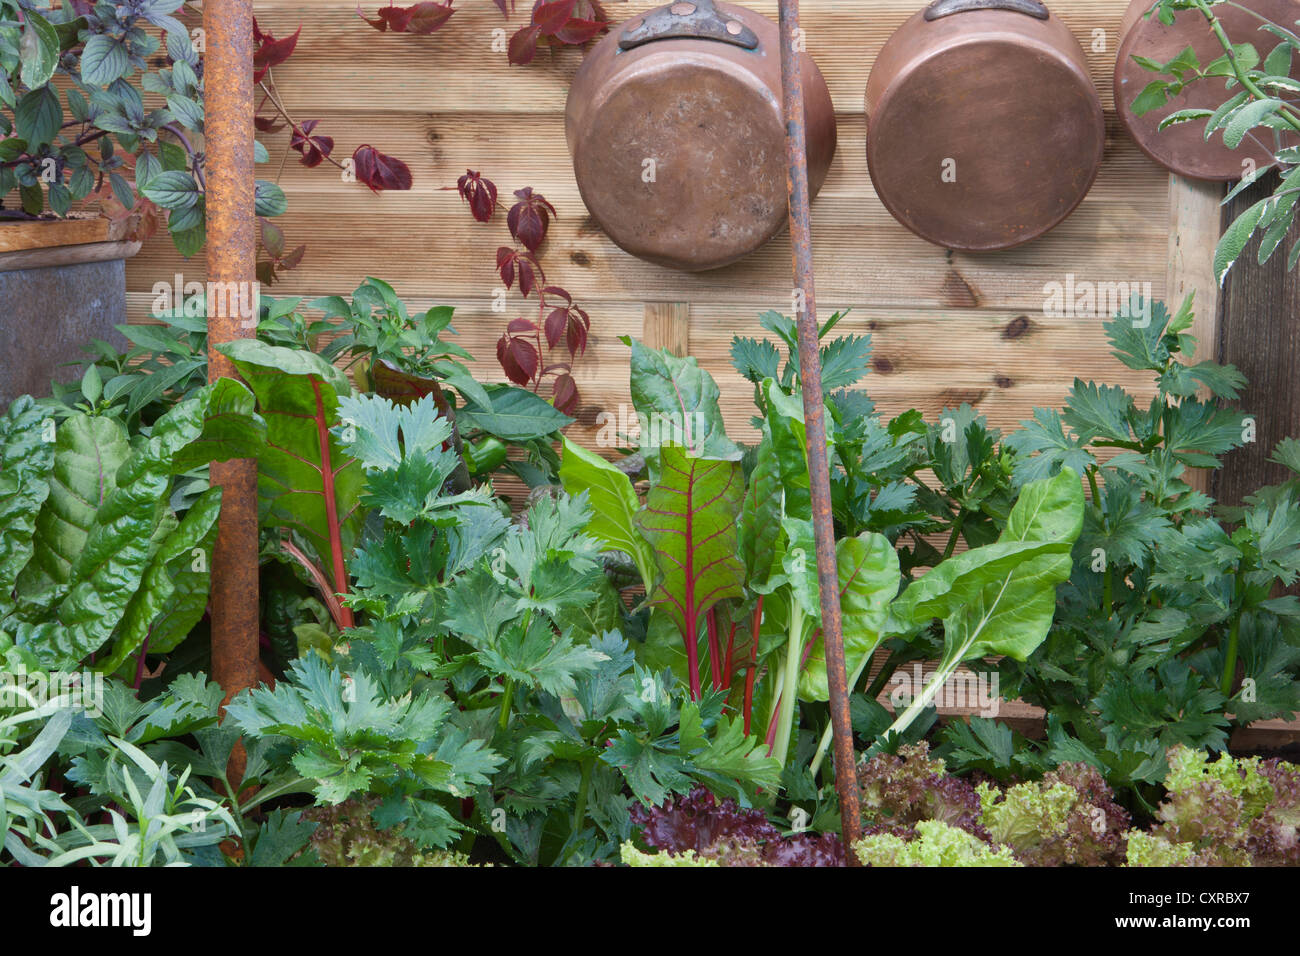 small space outdoor kitchen garden with salad and herb herbs crops lettuce parsley celery and ruby red chard growing and copper pots and pans UK Stock Photo